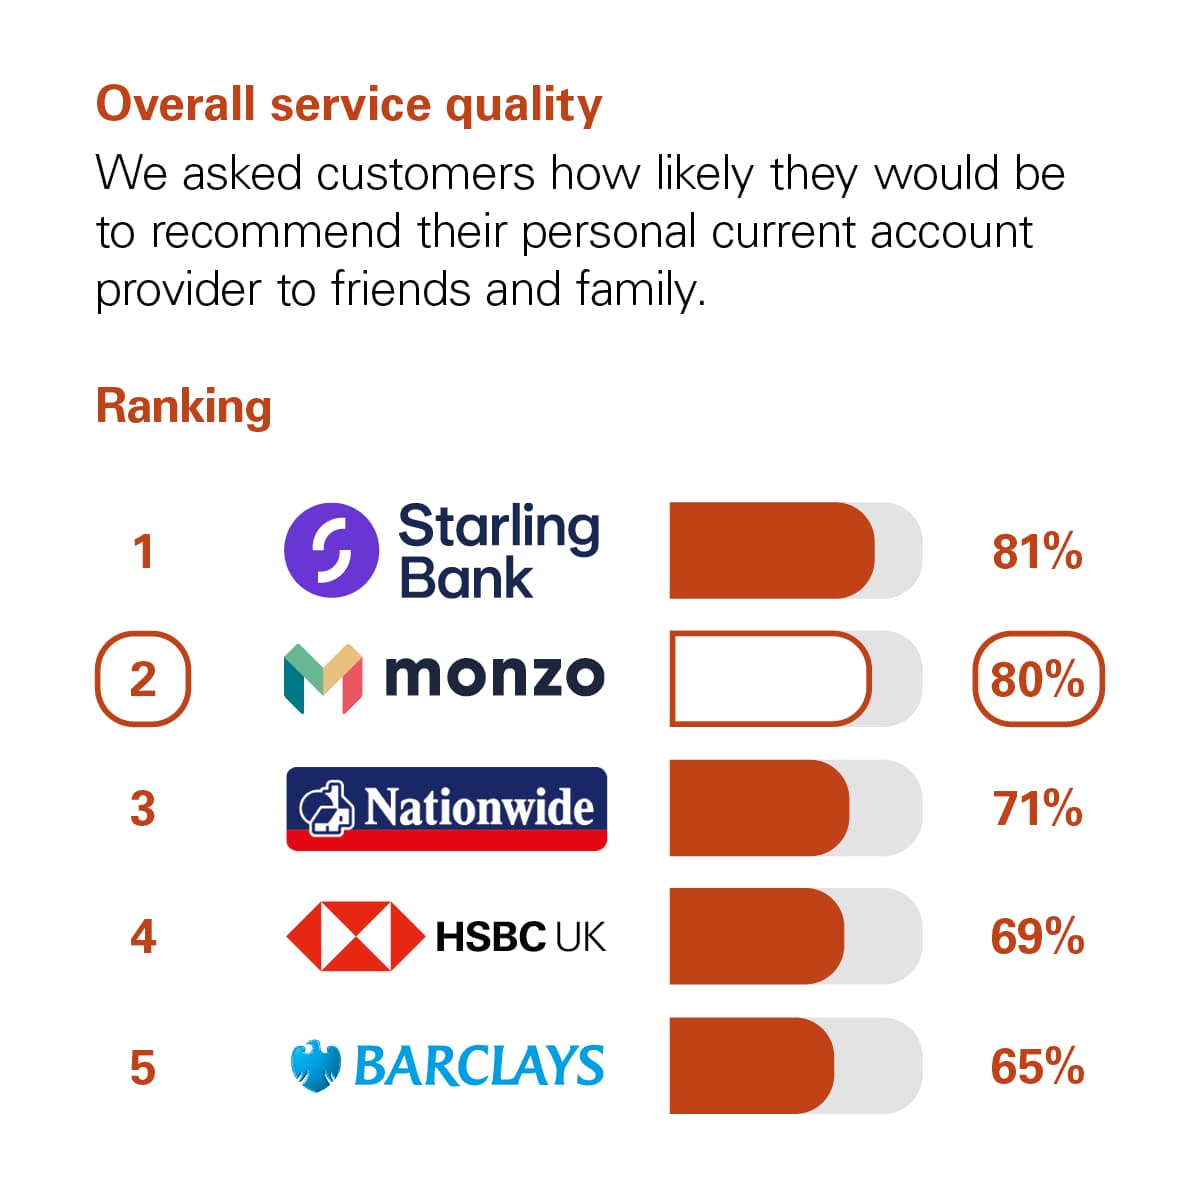 Graph showing the results of the CMA scoring of UK banks in the Overall Service Quality category. The CMA asked customers how likely they would be to recommend their personal current account provider to friends and family. The rankings with percentage scores are: 1st Starling Bank with 81%. 2nd Monzo with 80%. 3rd Nationwide with 71%. 4th HSBC UK with 69%. 5th Barclays with 65%.